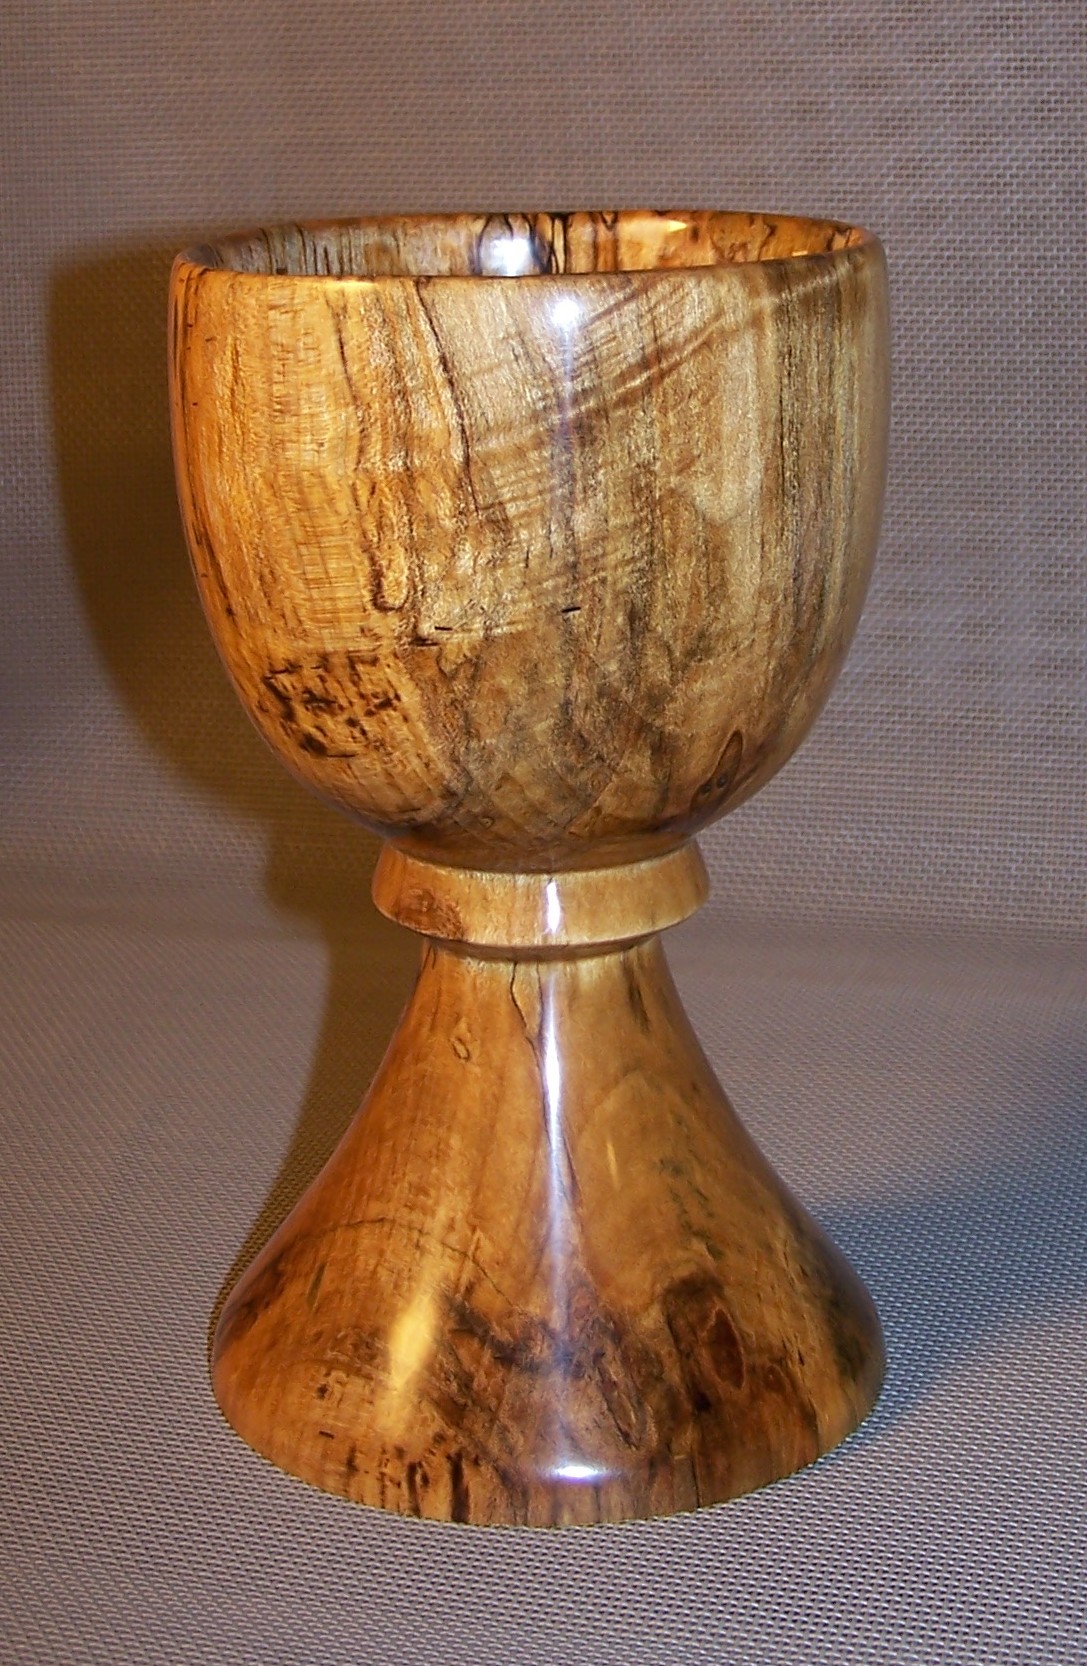 The Chalice